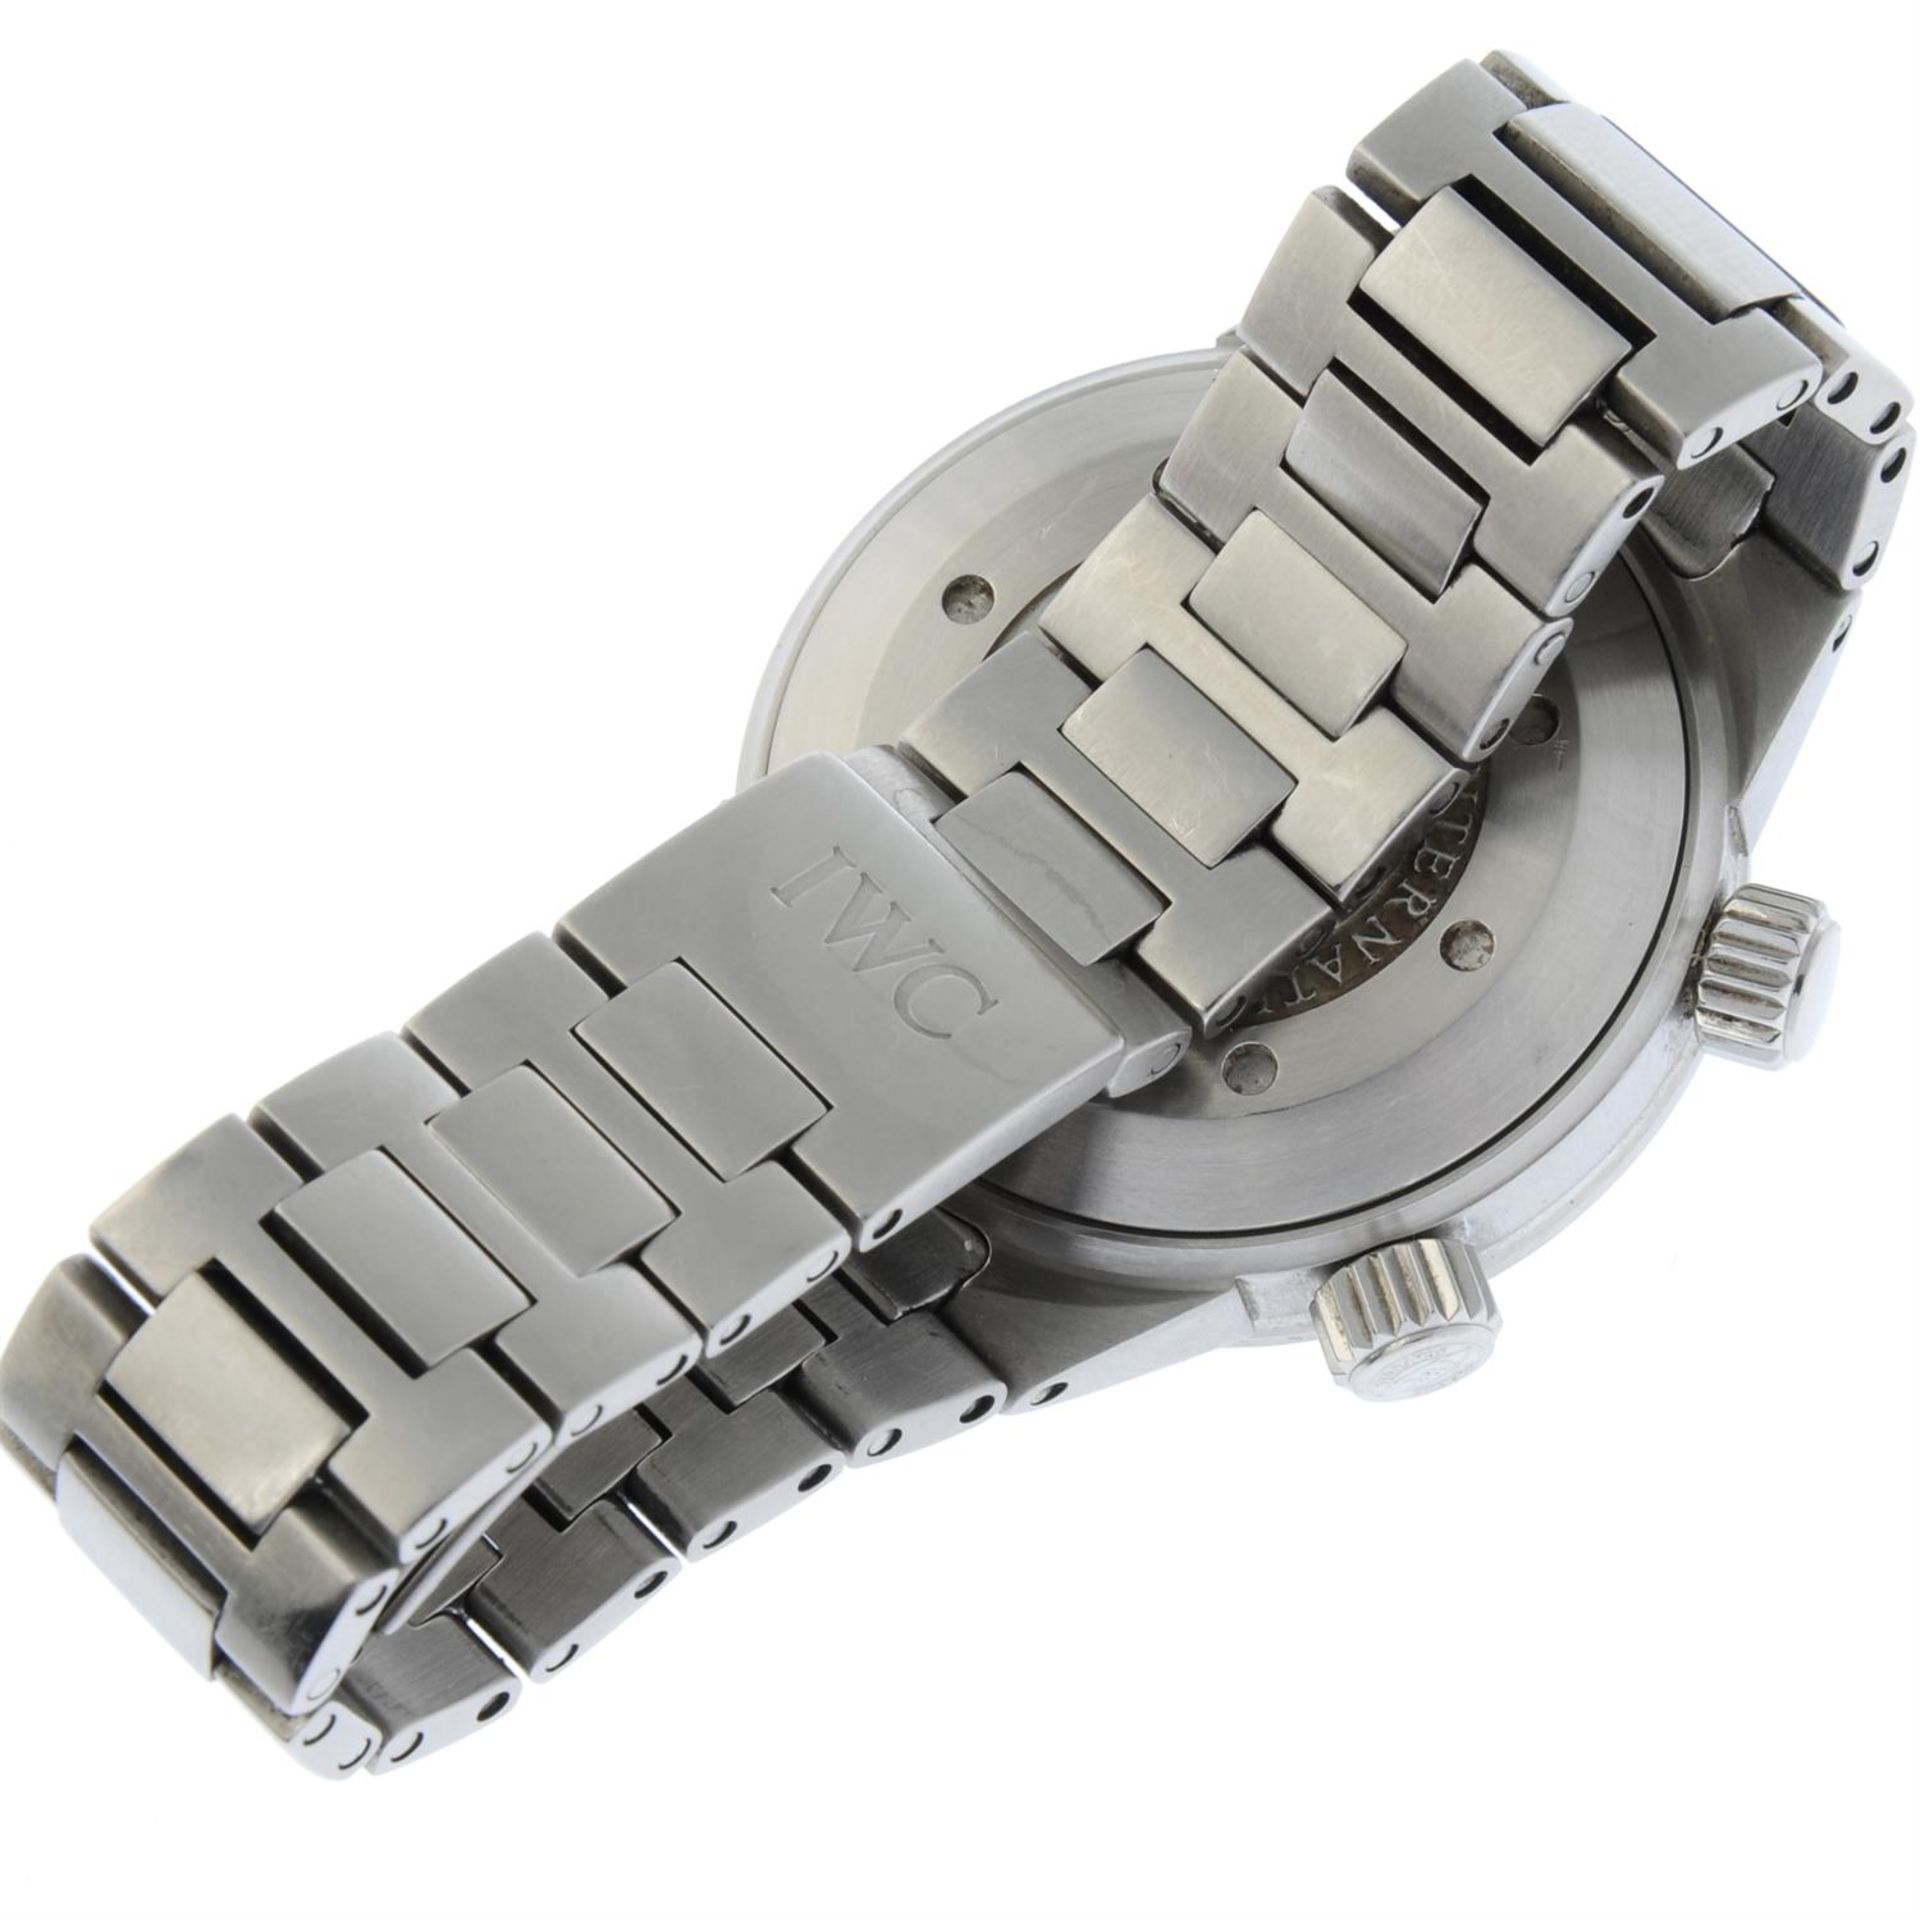 IWC - a stainless steel Aquatimer bracelet watch, 42mm. - Image 2 of 5